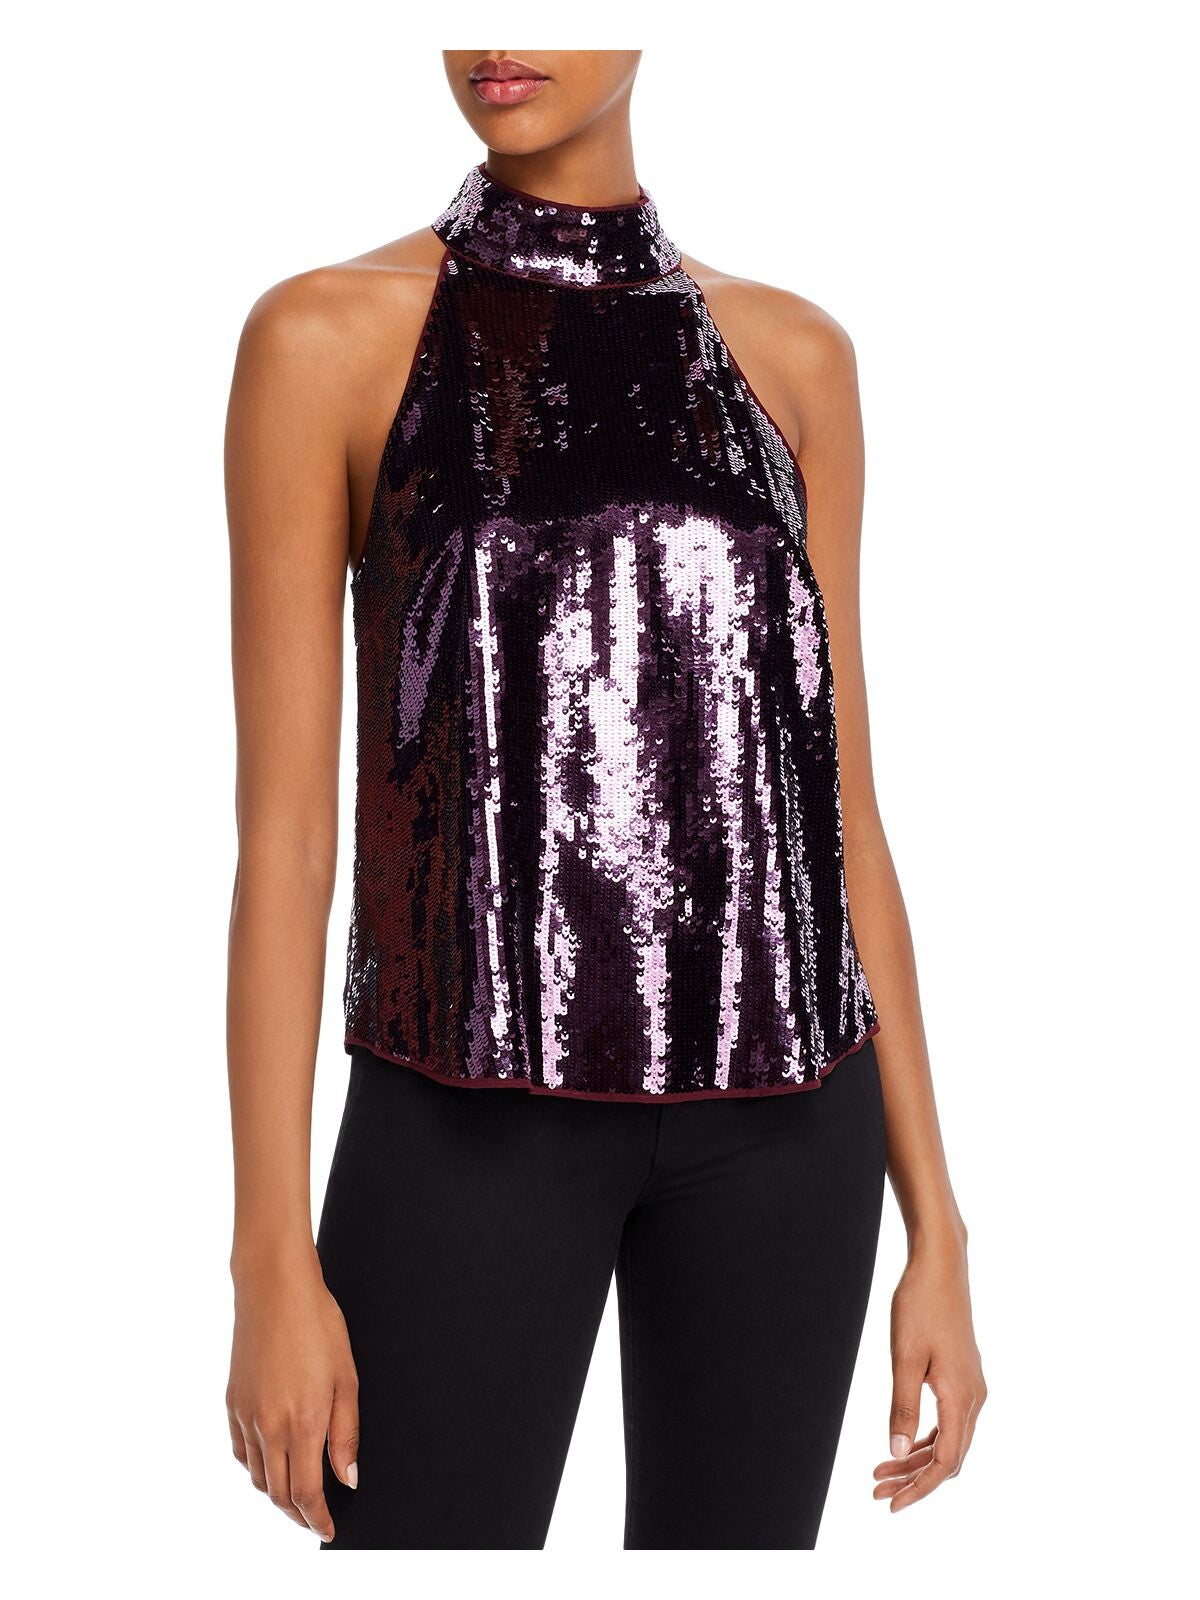 JOIE Womens Sequined Sleeveless Halter Party Top